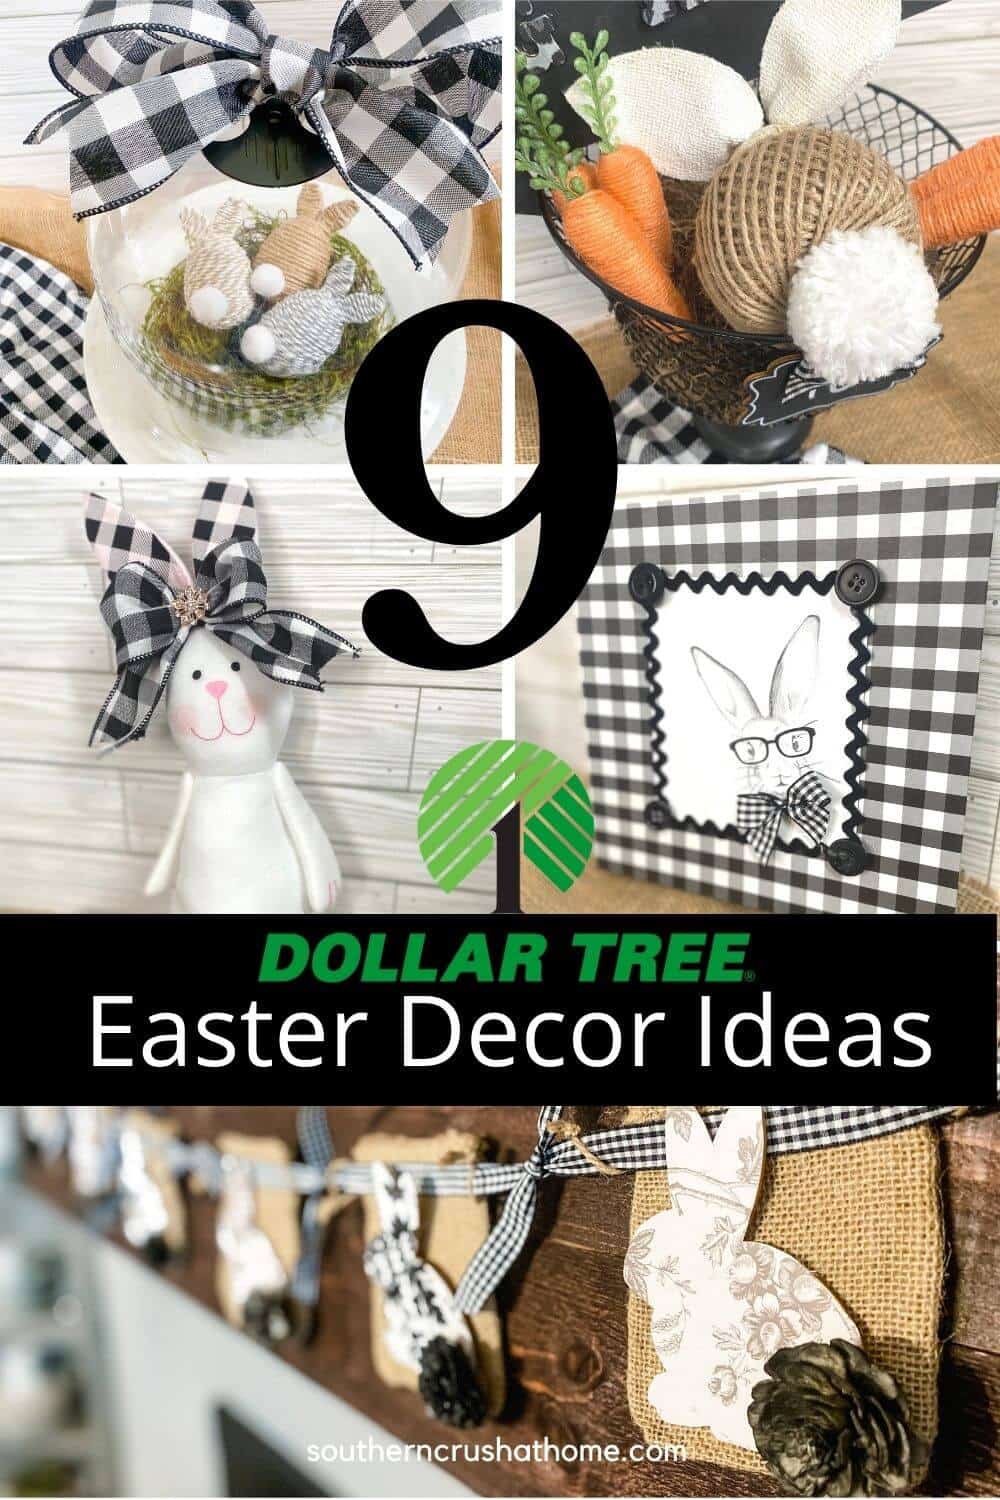 DIY DOLLAR TREE BLACK AND WHITE TABLE SETTING  DIY DOLLAR TREE CENTERPIECES,  DOLLAR TREE WEDDING 